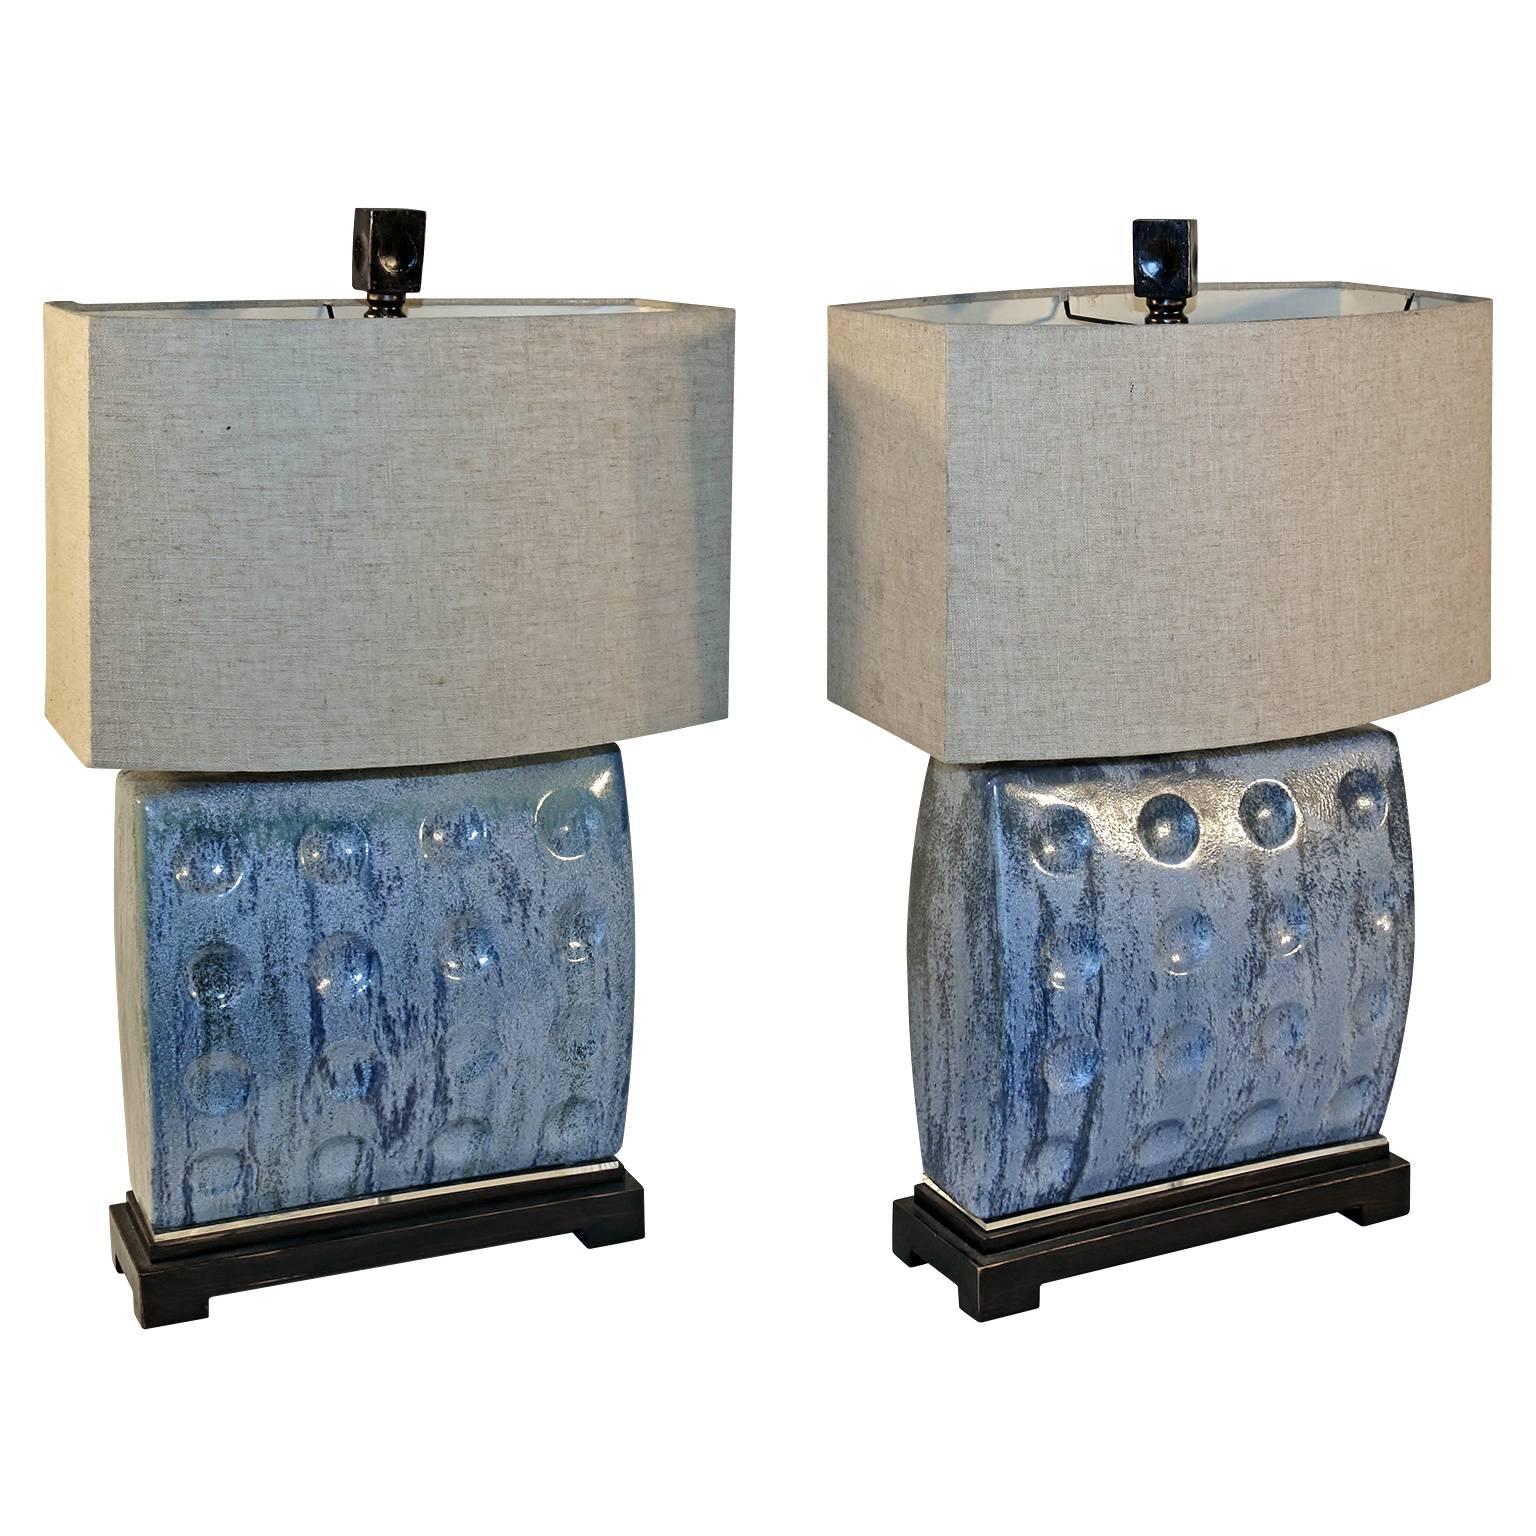 This amazing pair of Mid-Century glazed studio pottery mounted lamps are in excellent used condition. They are mounted on a Lucite wooden base and are topped with attractive wooden finials over a linen shades.

The lamps measure 5" deep x